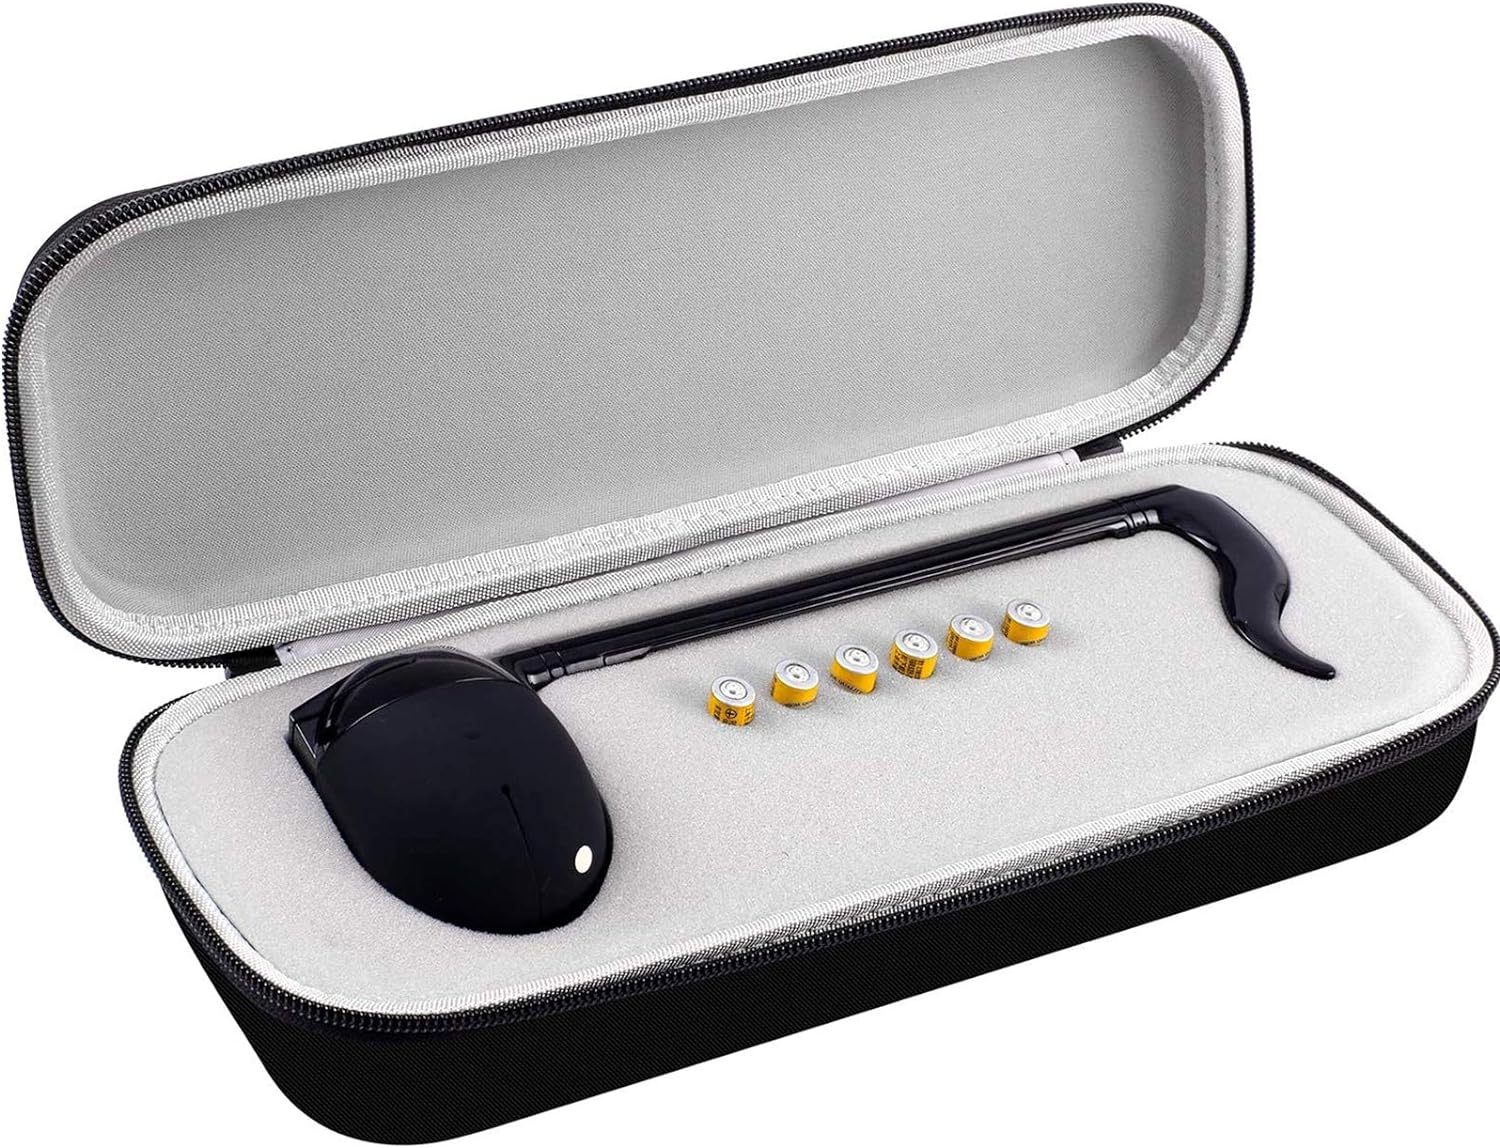 The Case Compatible with Otamatone [English Edition] Japanese Electronic Musical Instrument Portable Synthesizer by Cube/Maywa Denki, Storage Holder Only Fits for Regular (Box Only)